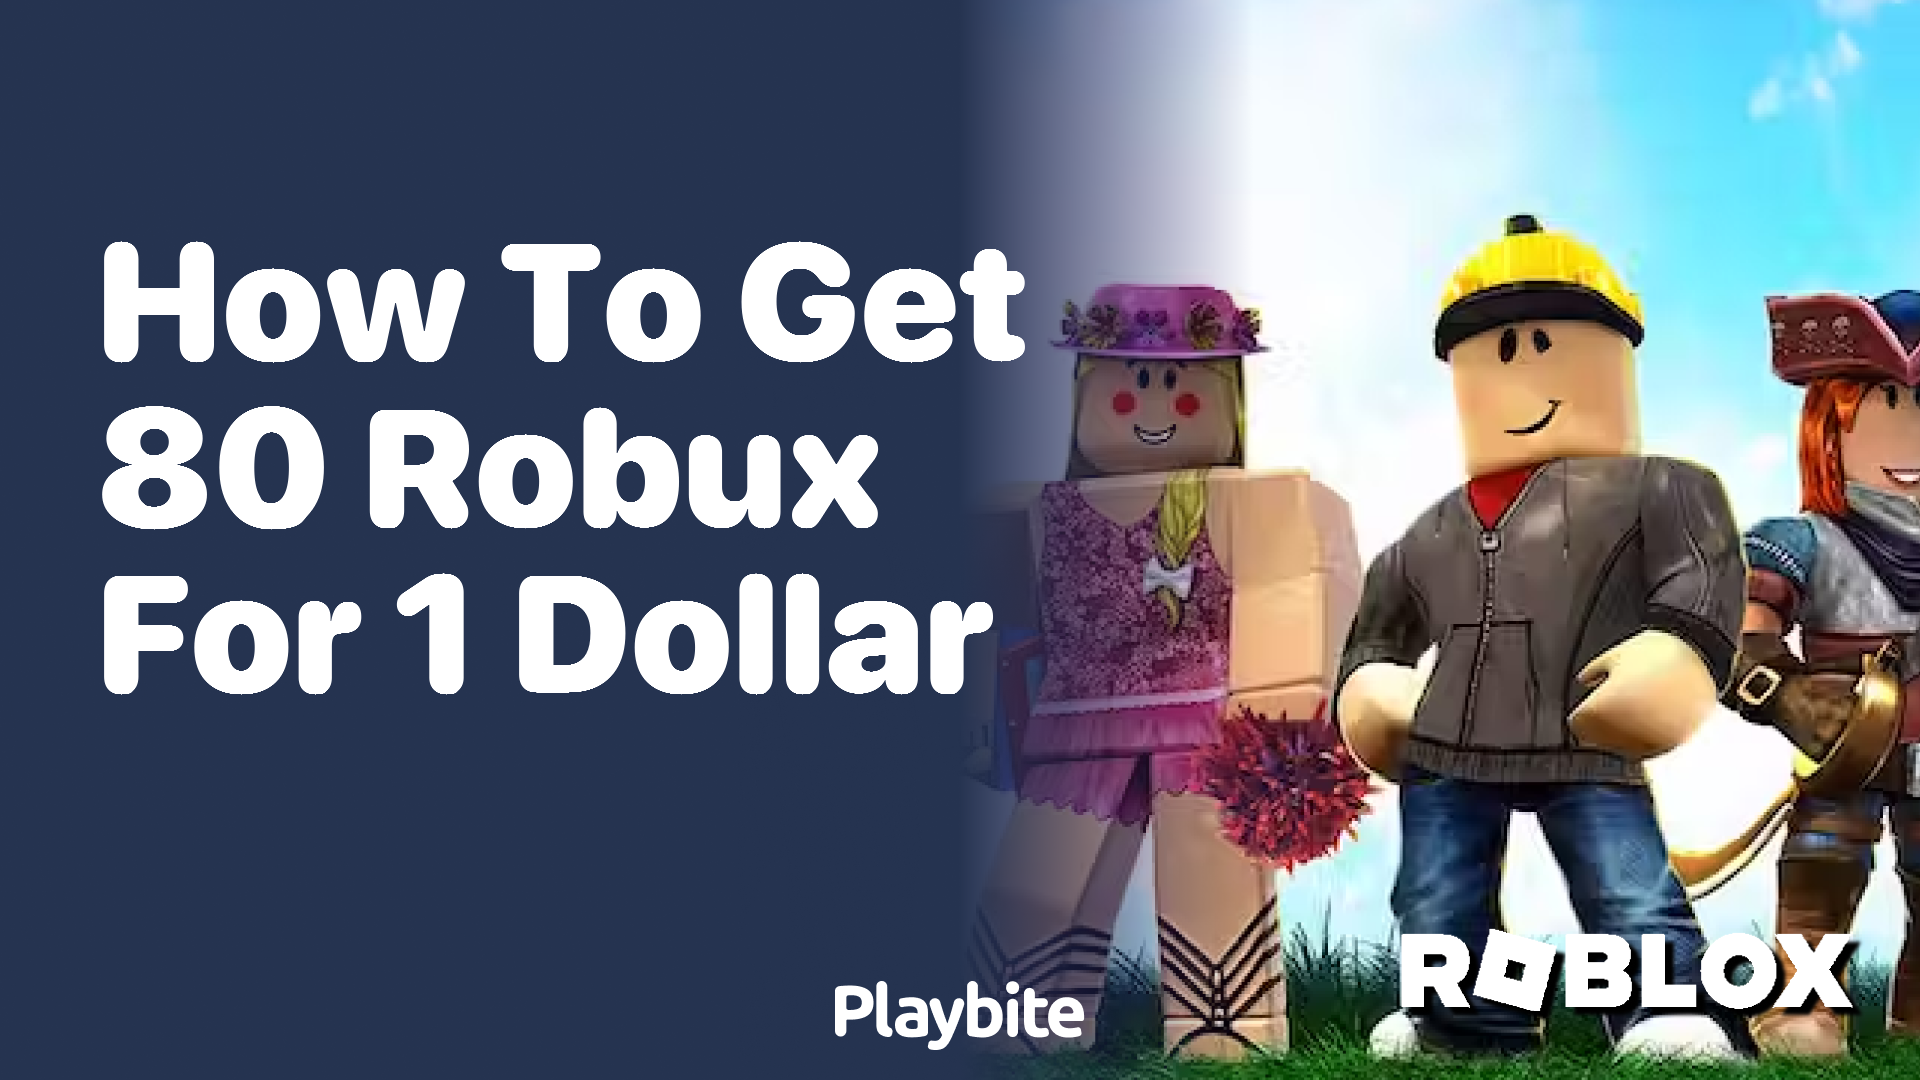 How to Get 80 Robux for 1 Dollar